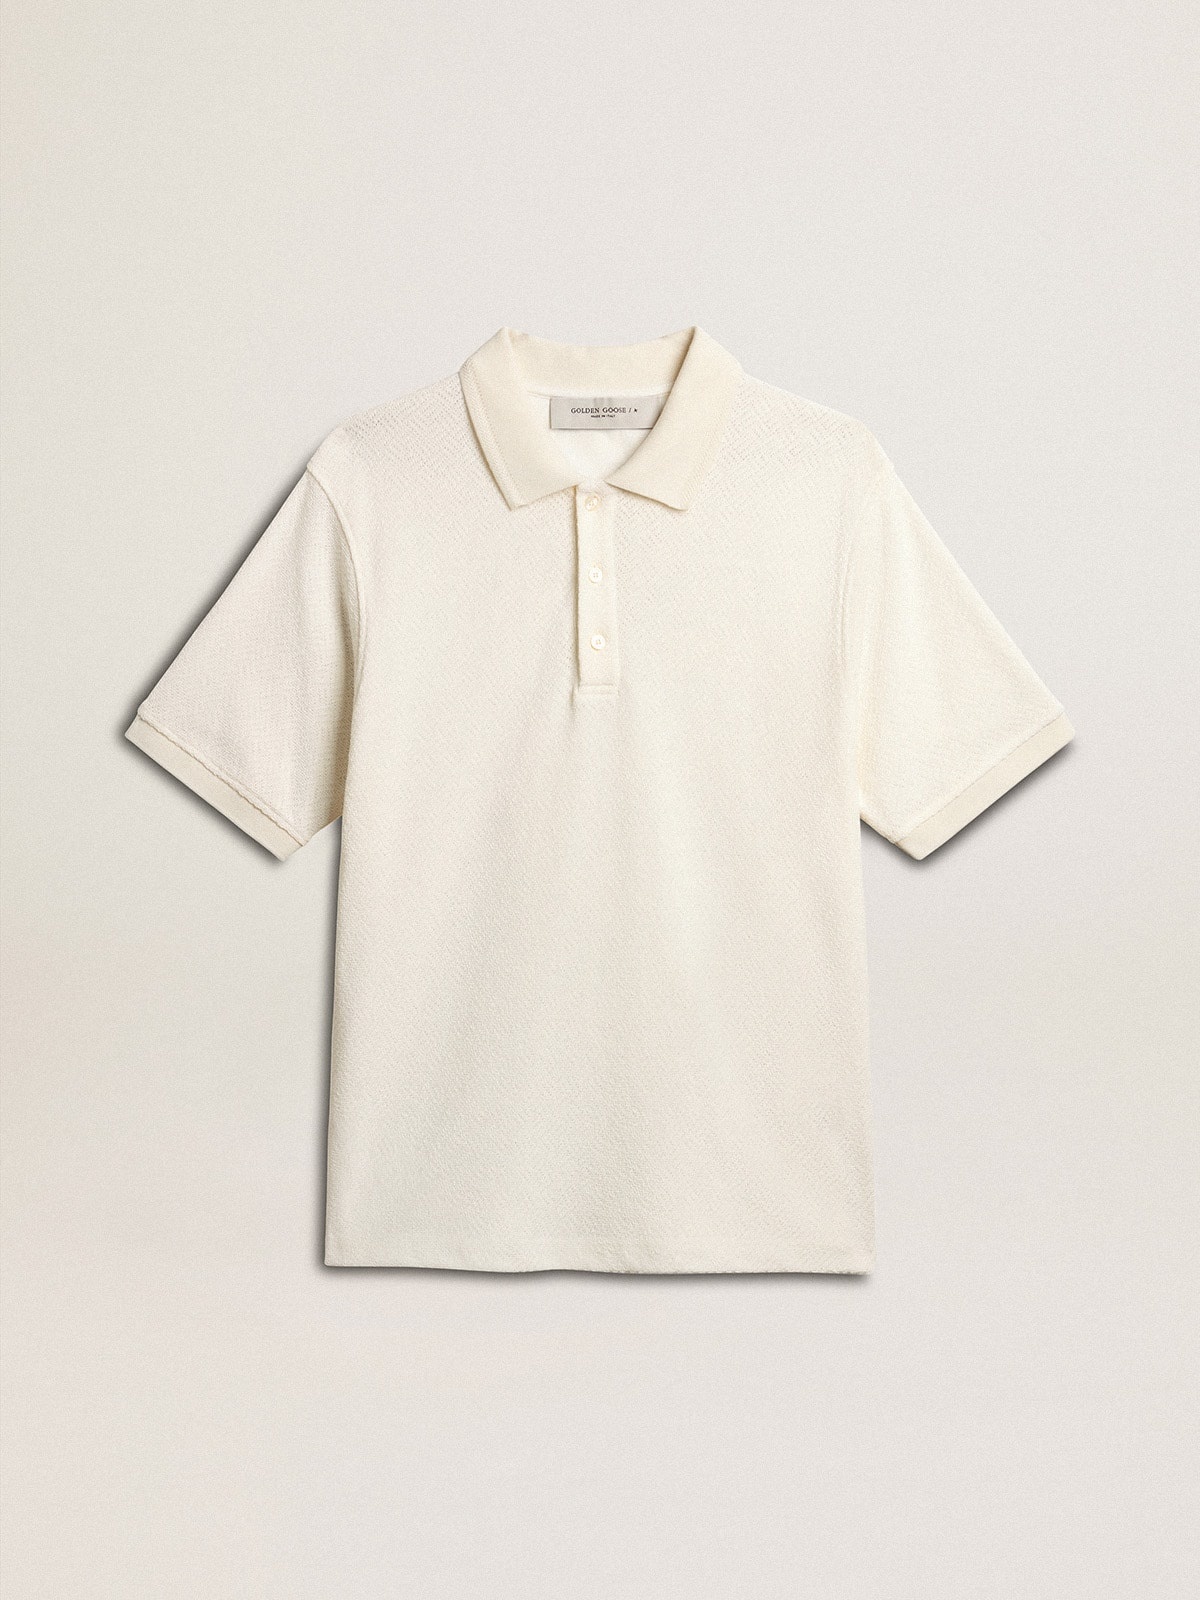 Men's polo shirt in white cotton with mother-of-pearl buttons - 1